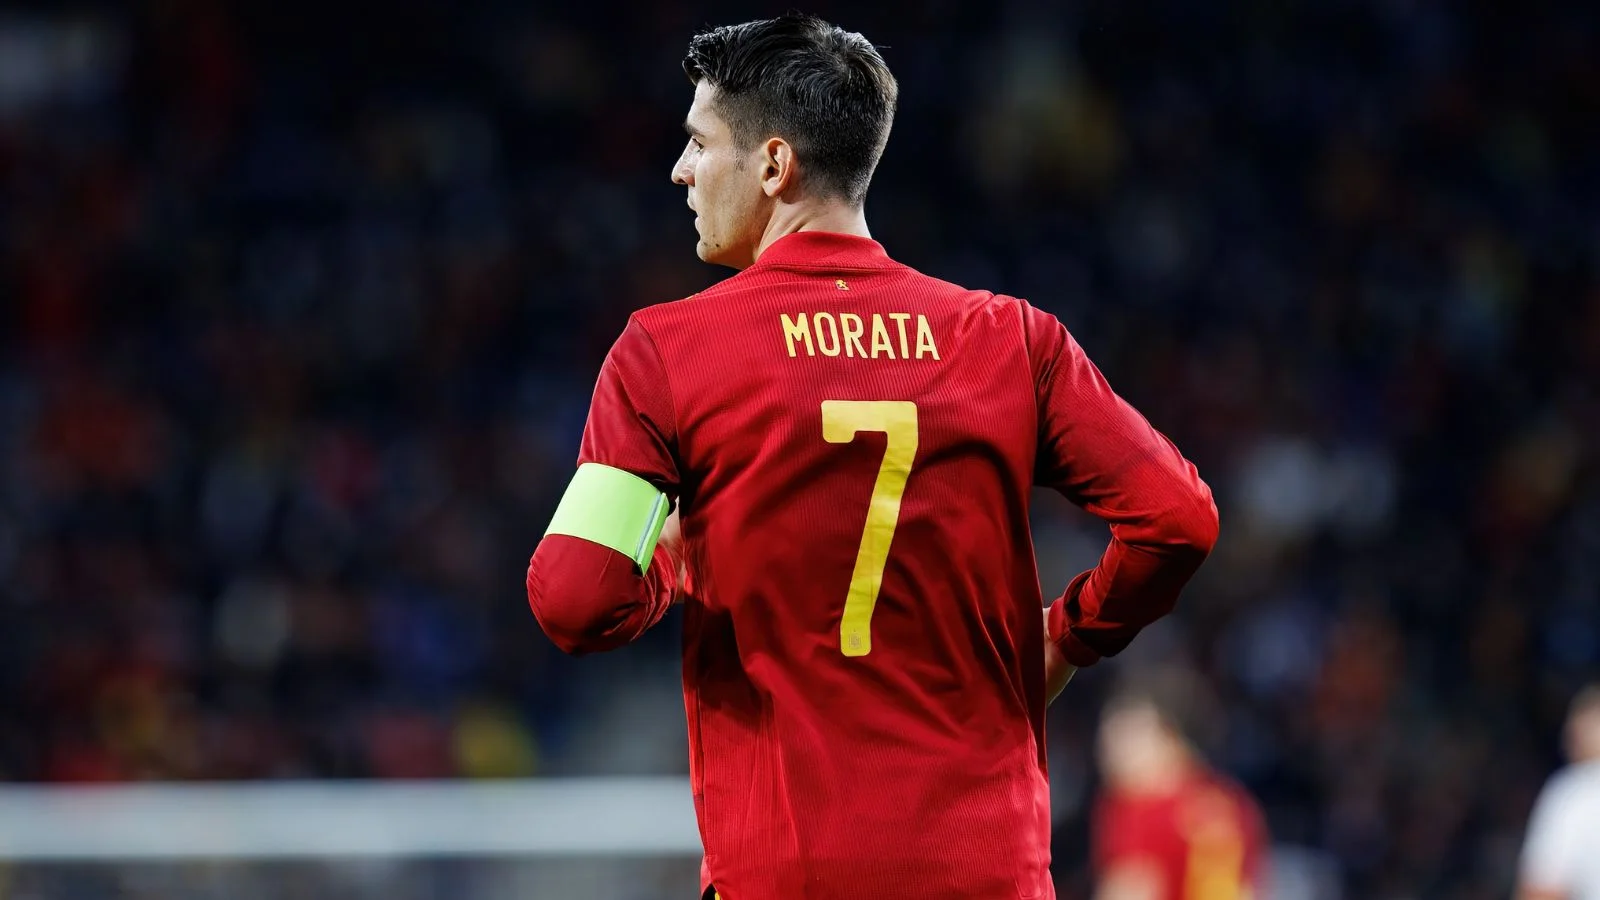 Morata has 36 goals in 77 matches for Spain